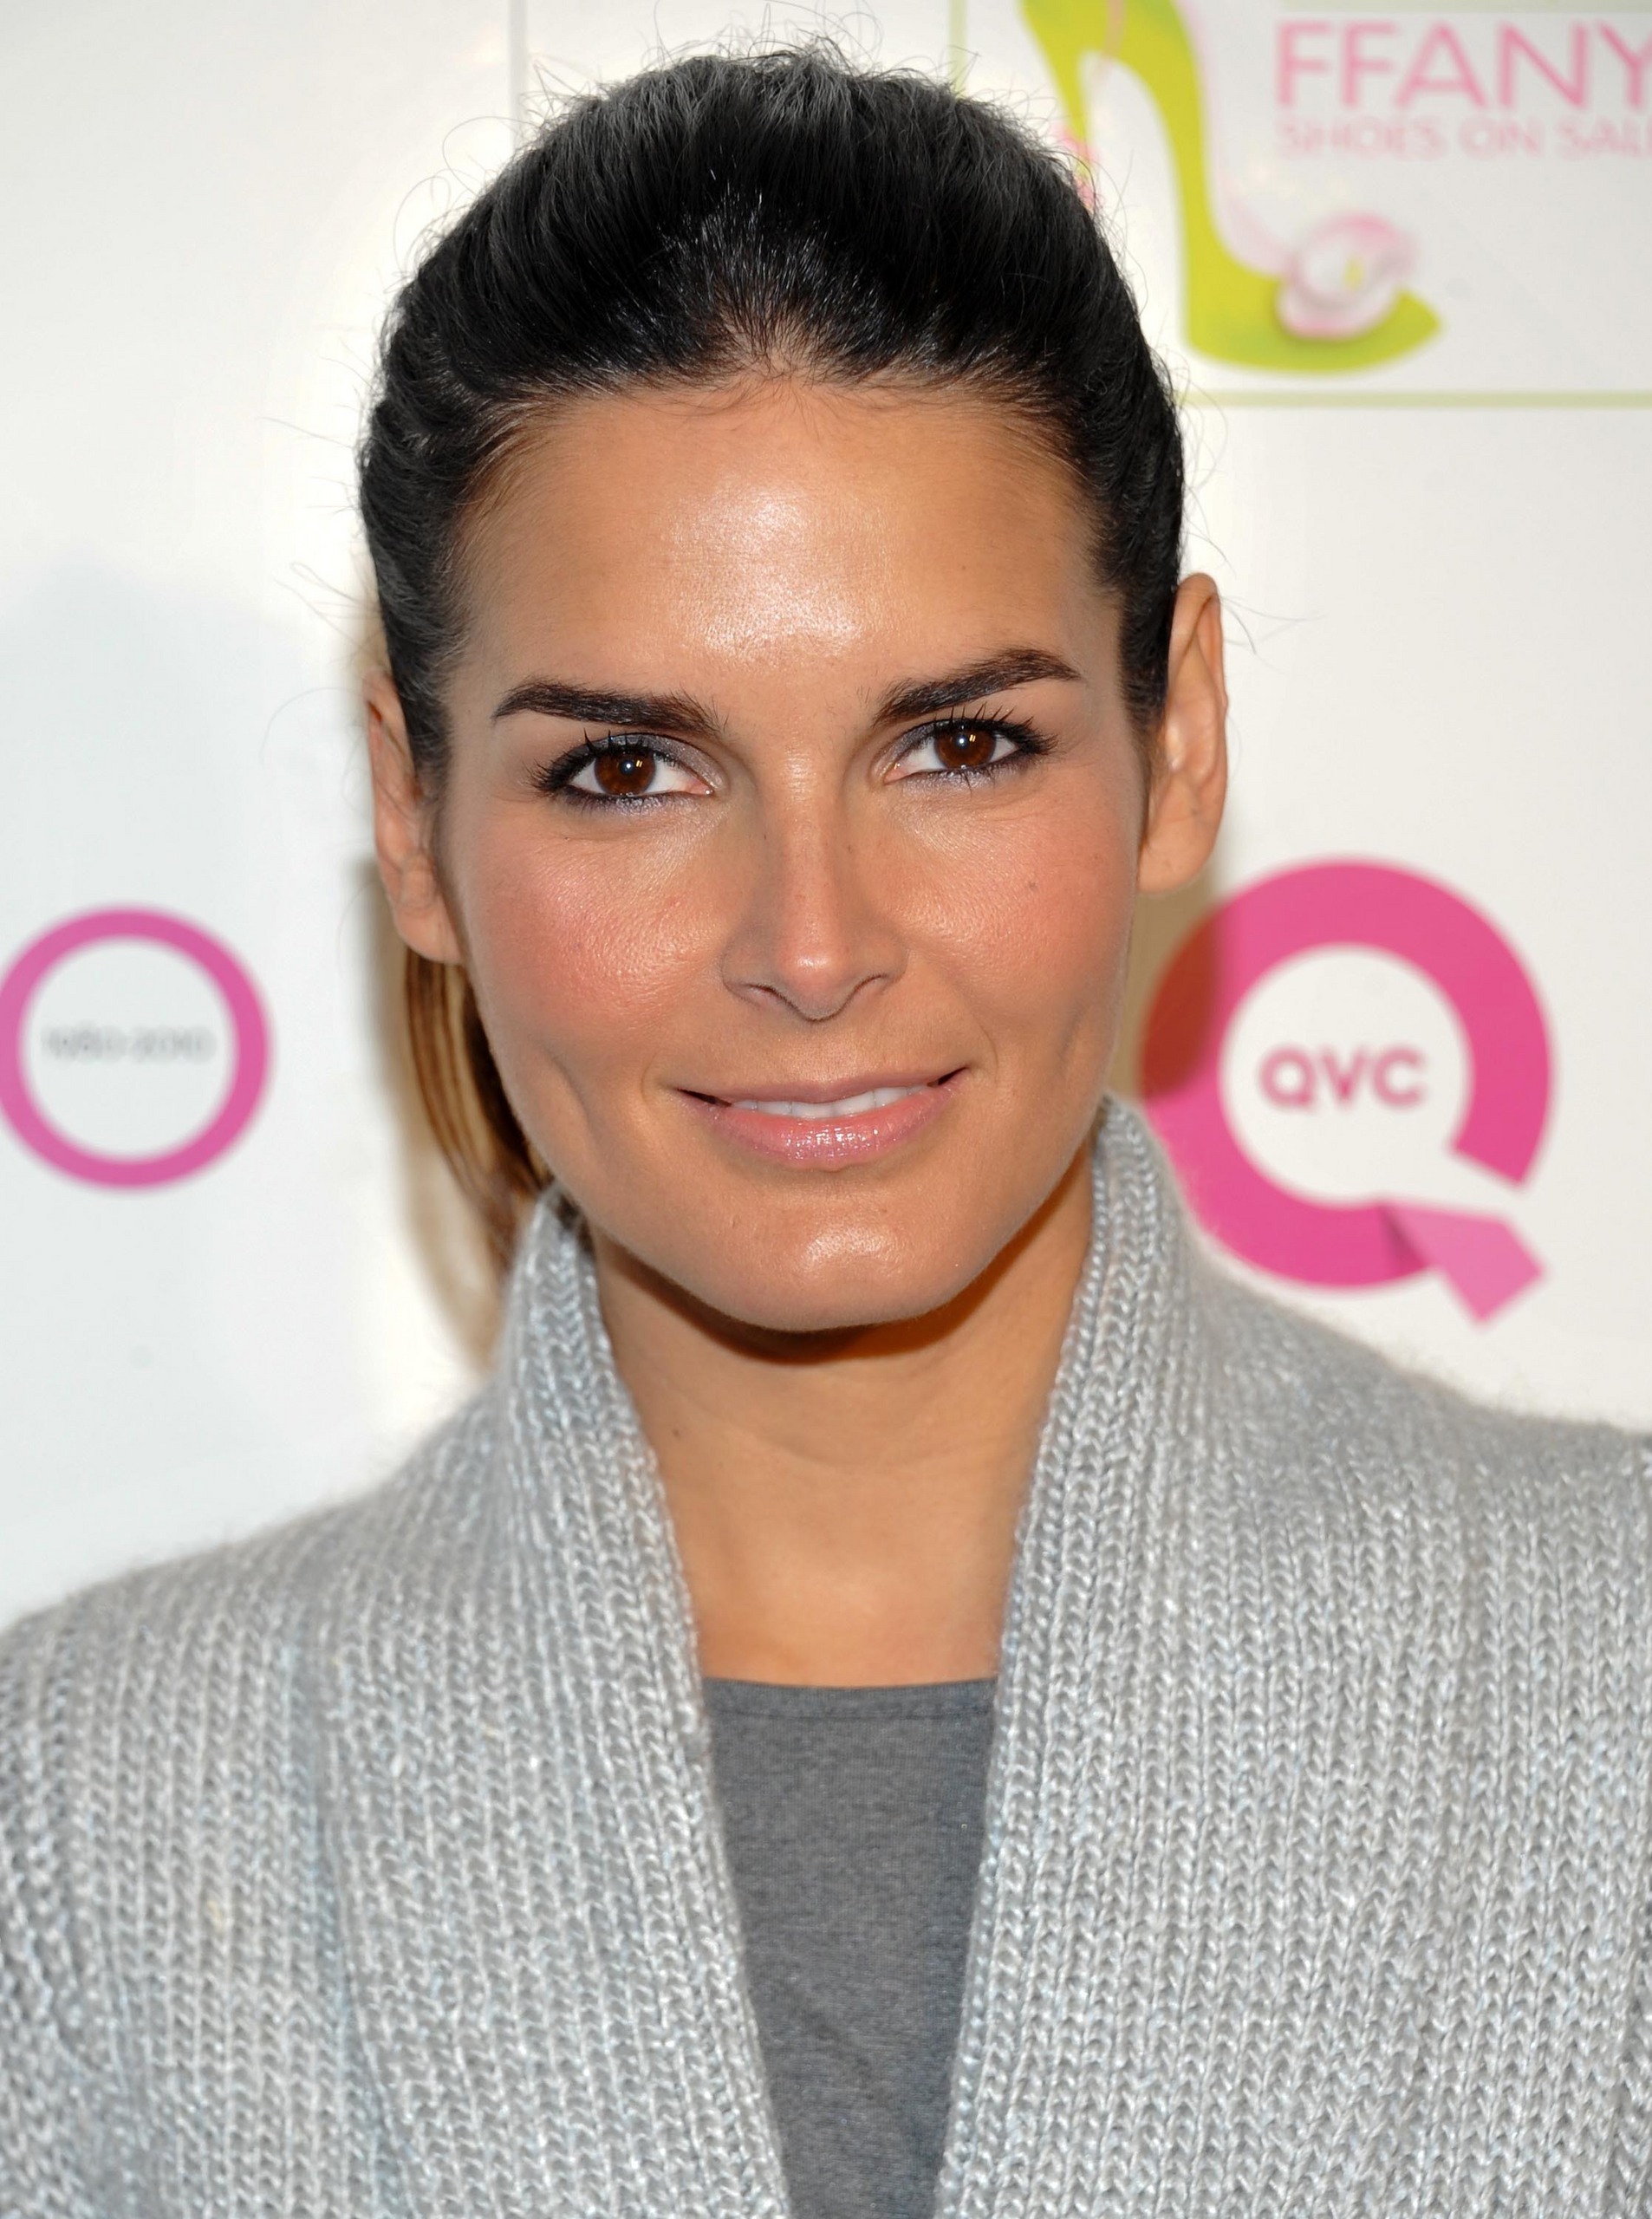 angie harmon, images, image, wallpaper, photos, photo, photograph, gallery,...